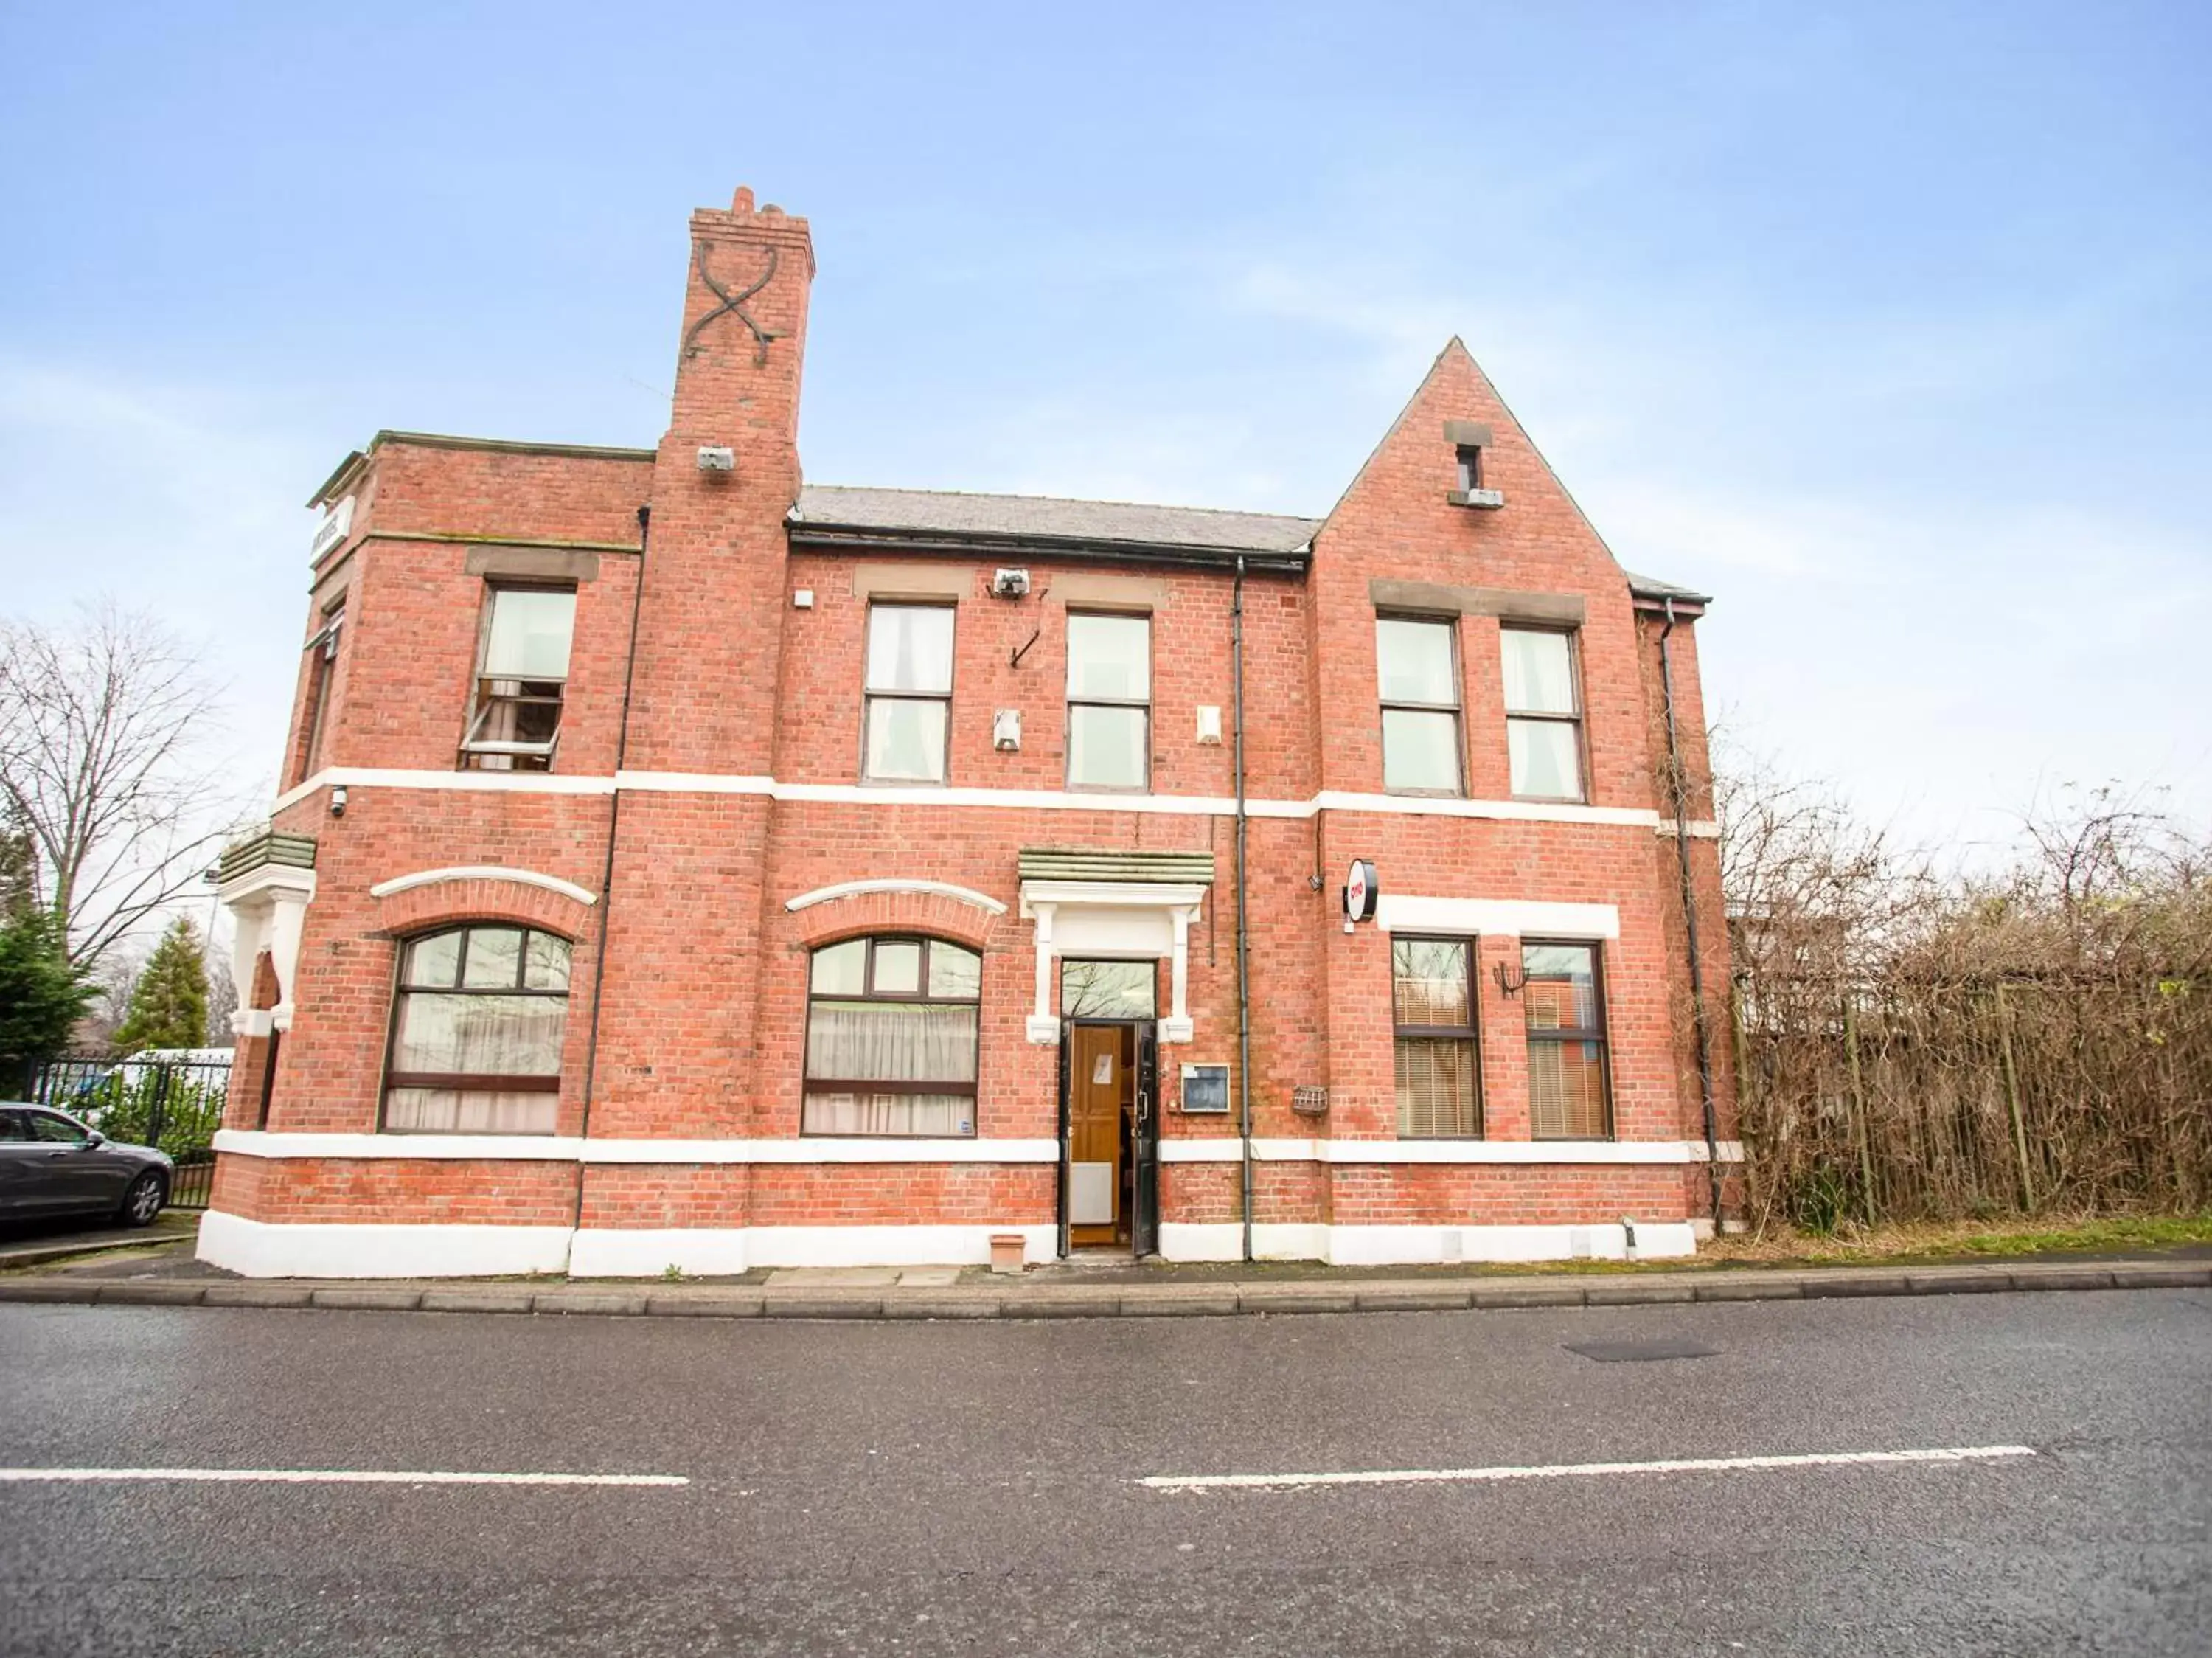 Property Building in OYO The Rowers Hotel, Dunston Gateshead